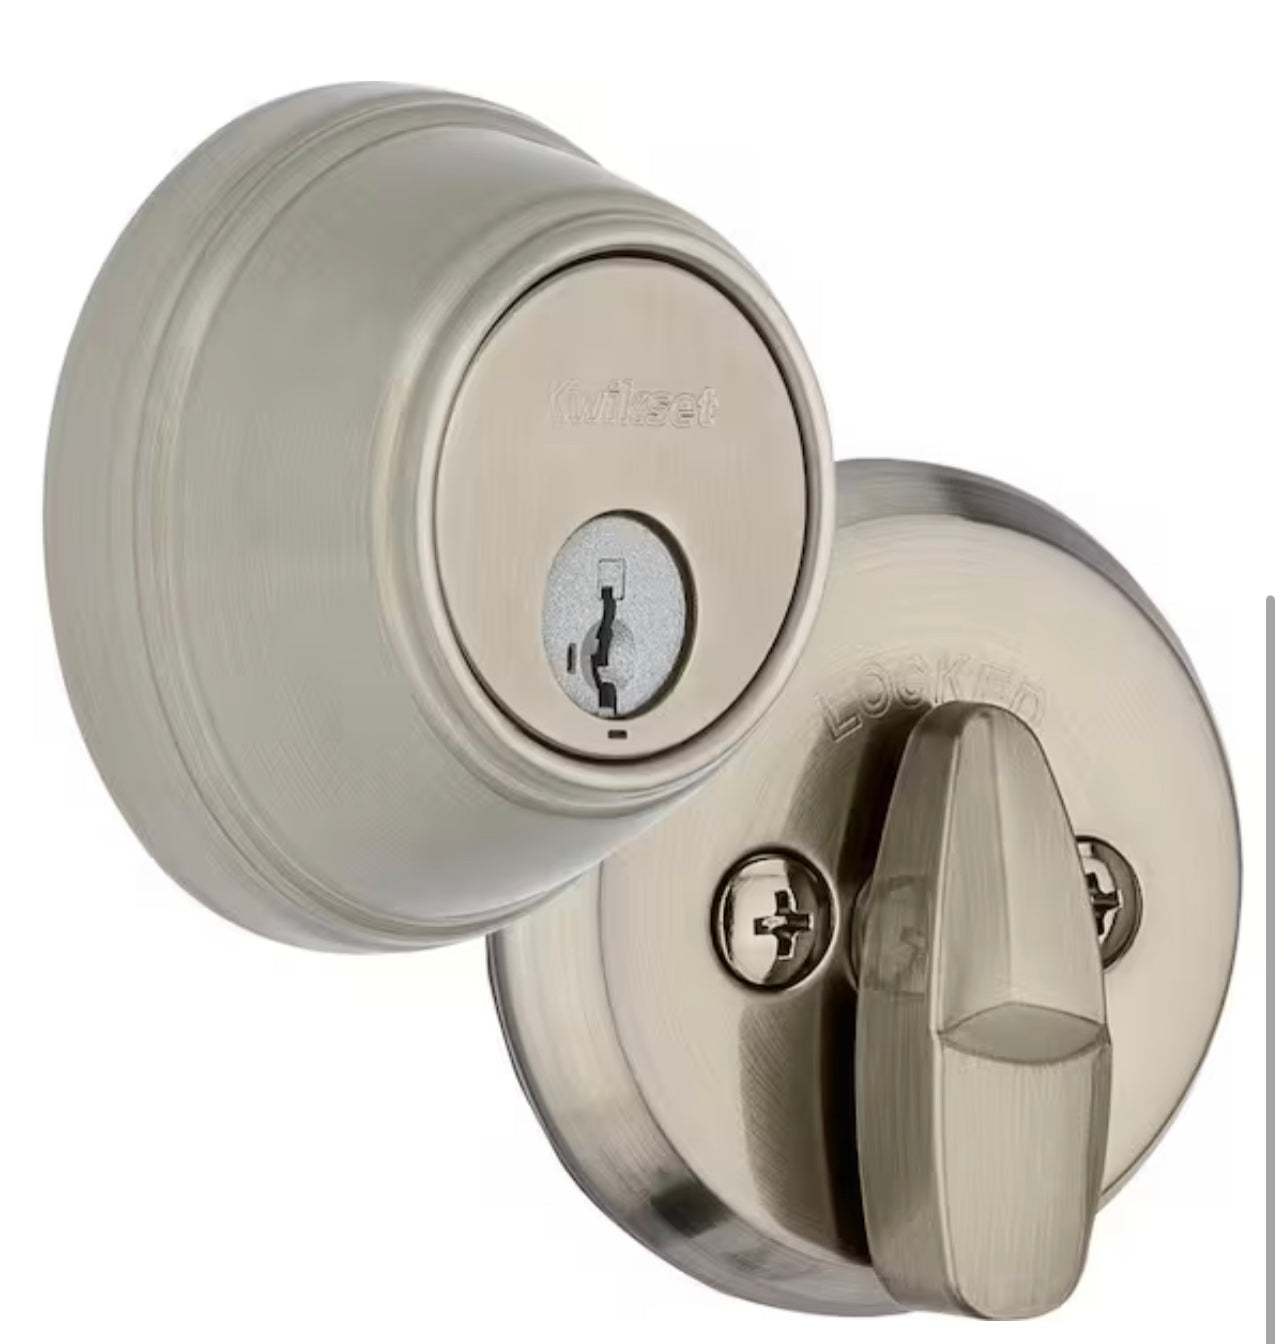 Kwikset 816 Single Cylinder Satin Nickel Key Control Deadbolt Featuring SmartKey Security with Microban Antimicrobial Technology Damaged Box